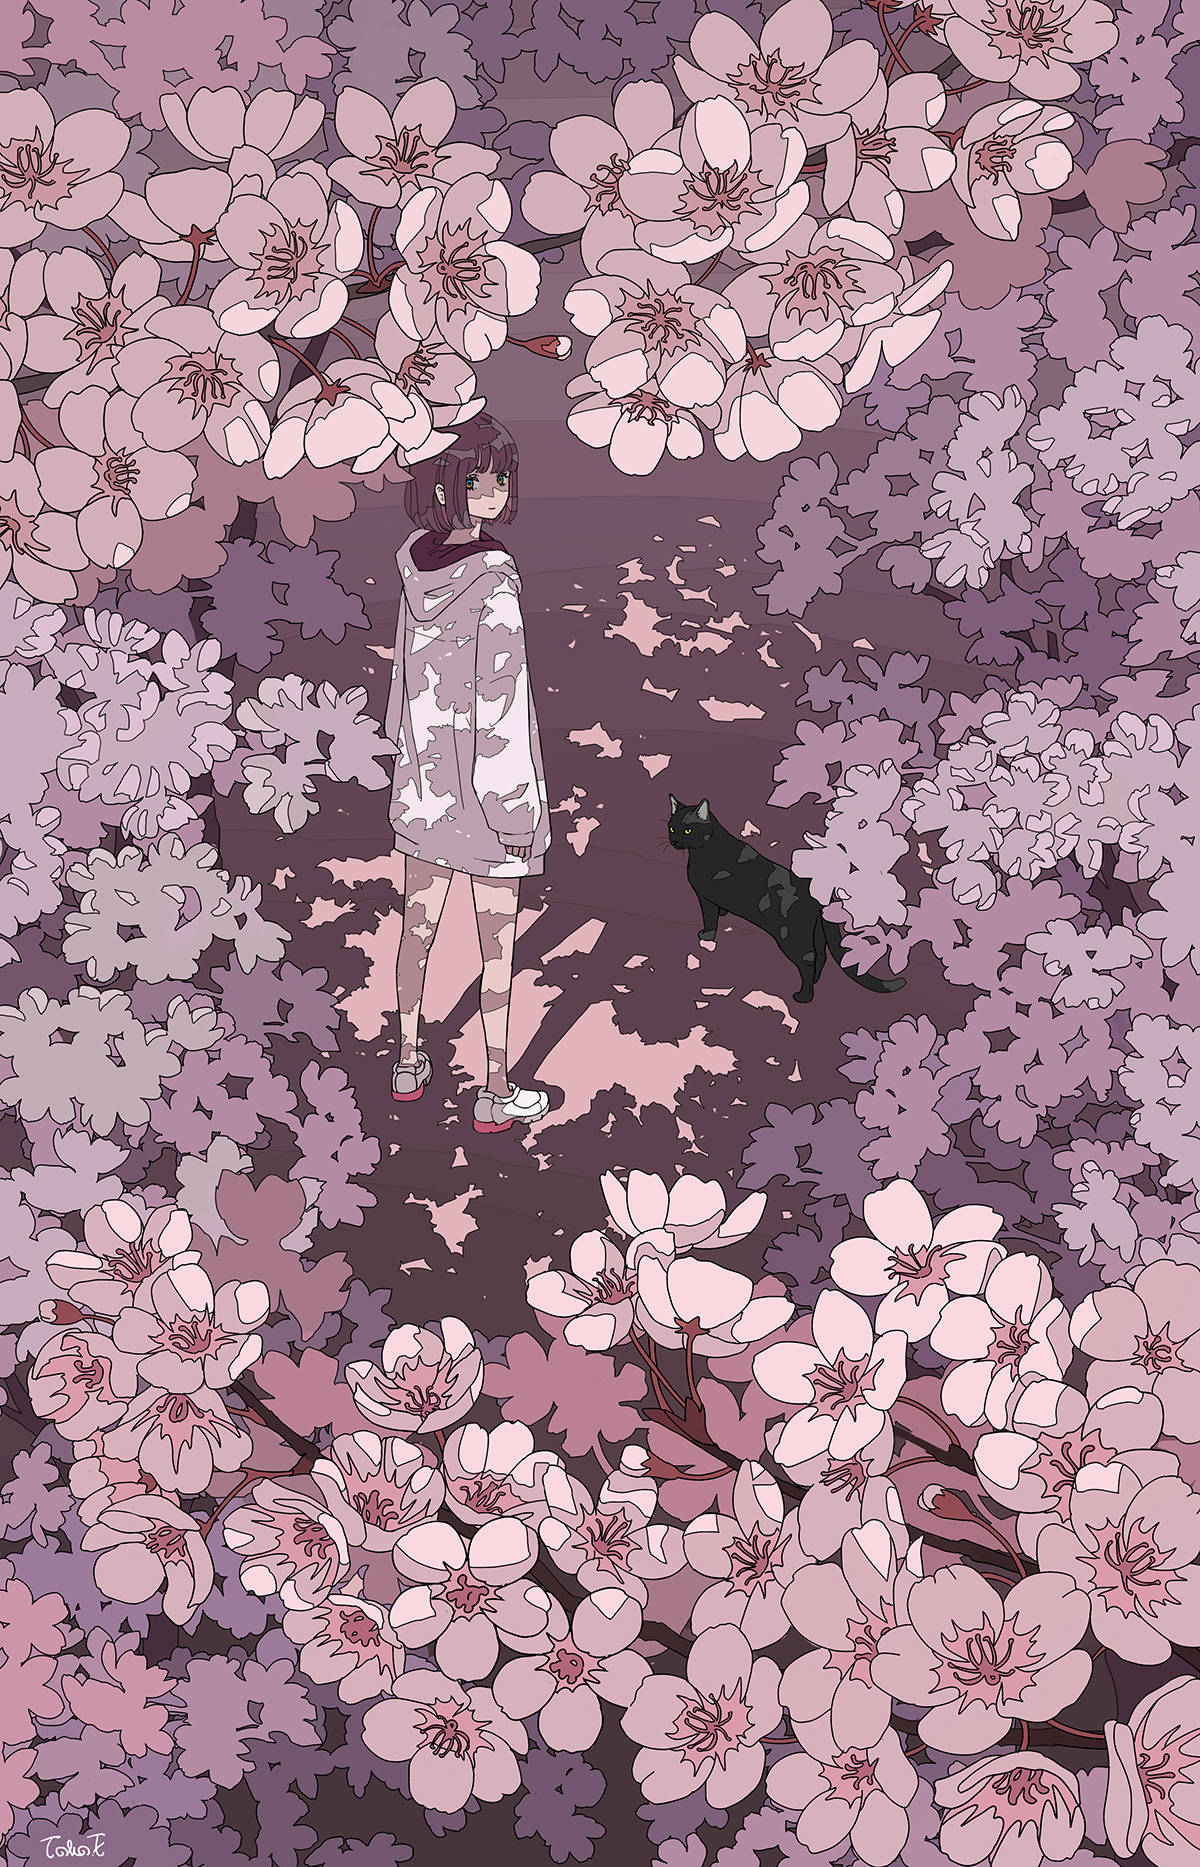 A digital illustration of a girl and her black cat walking through a cherry blossom forest. - Pink anime